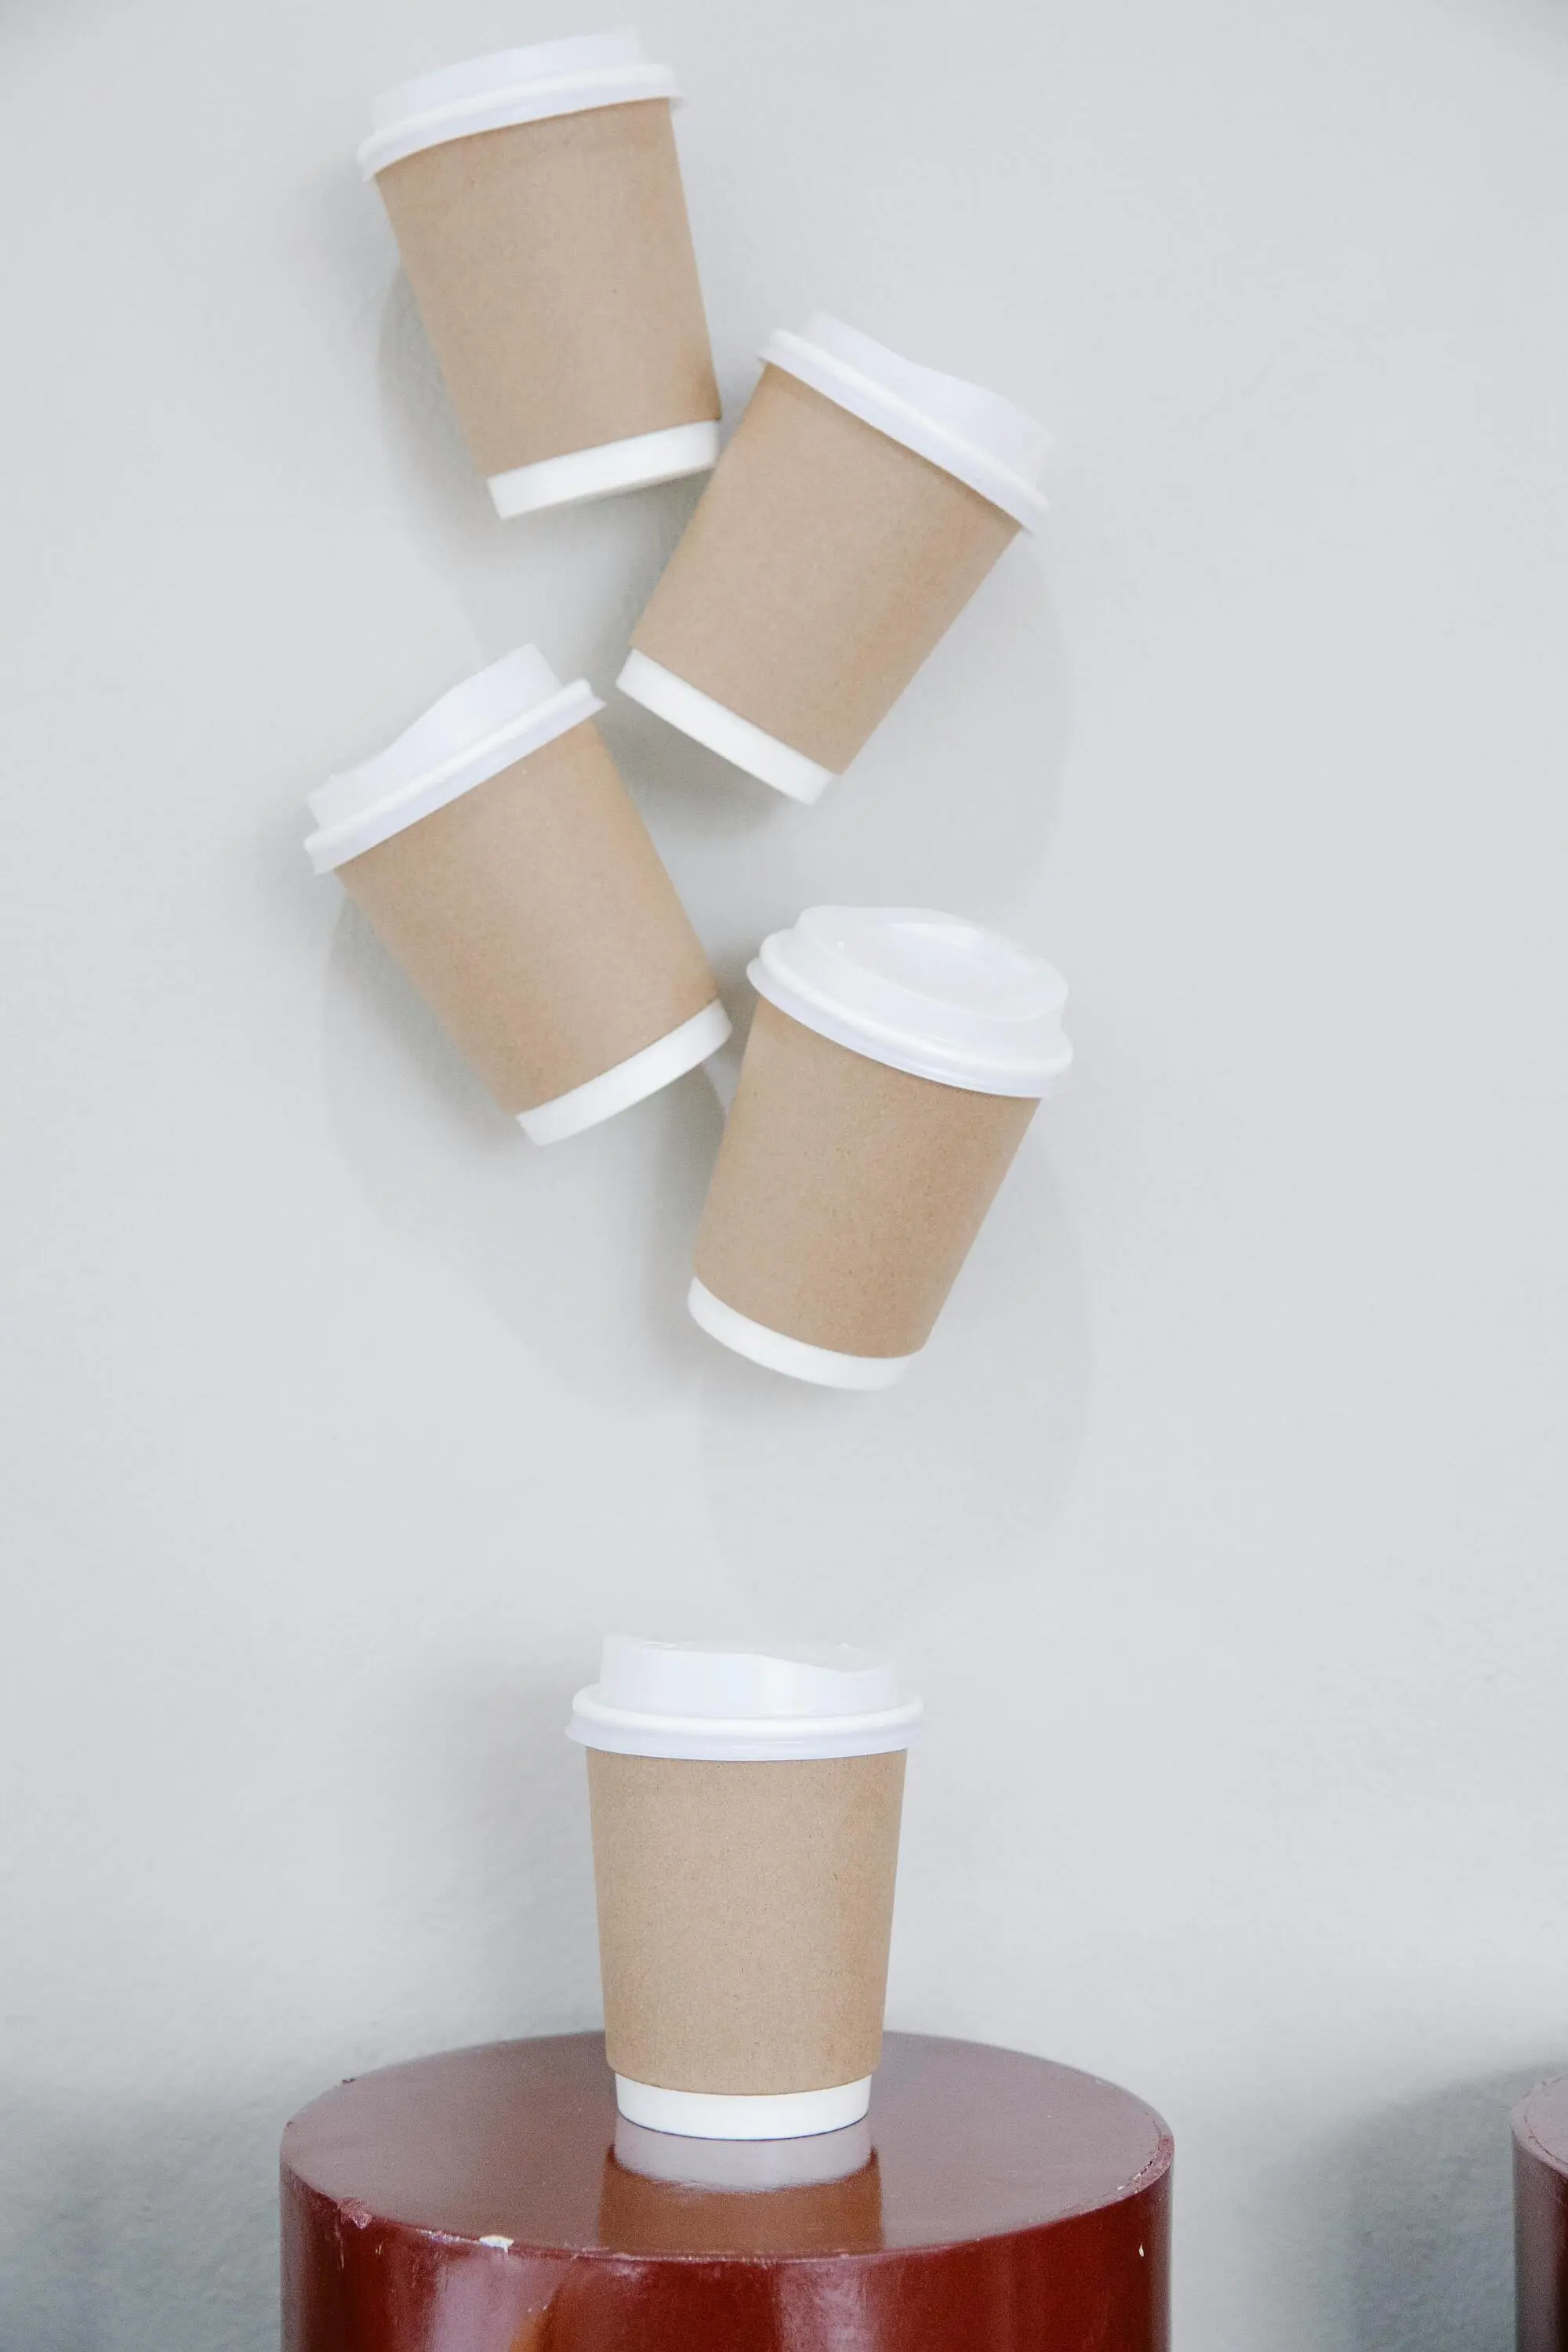 Advantages of Sustainable Paper Cups